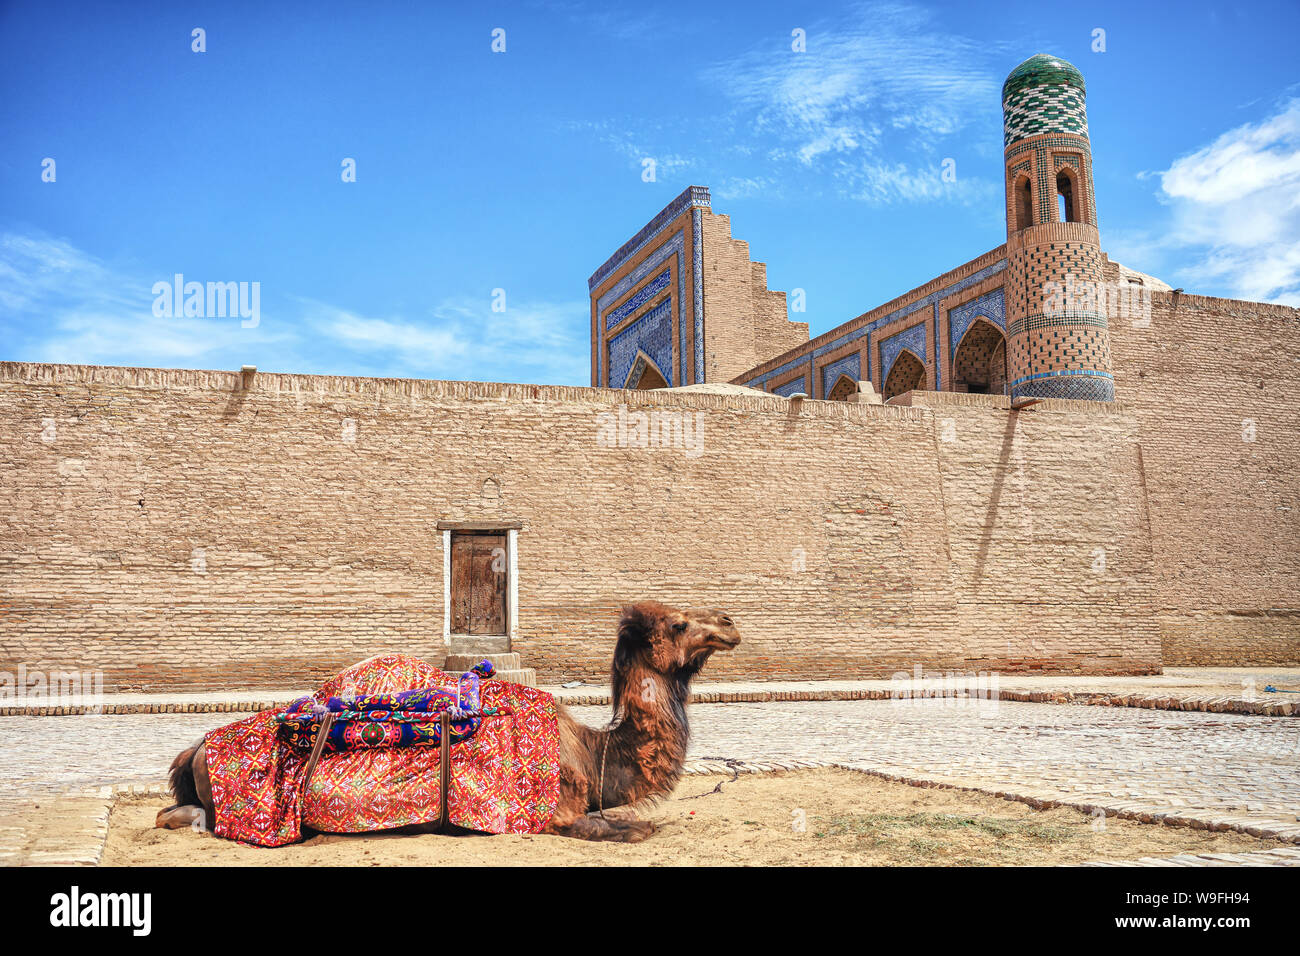 Camel resting outside city walls Stock Photo